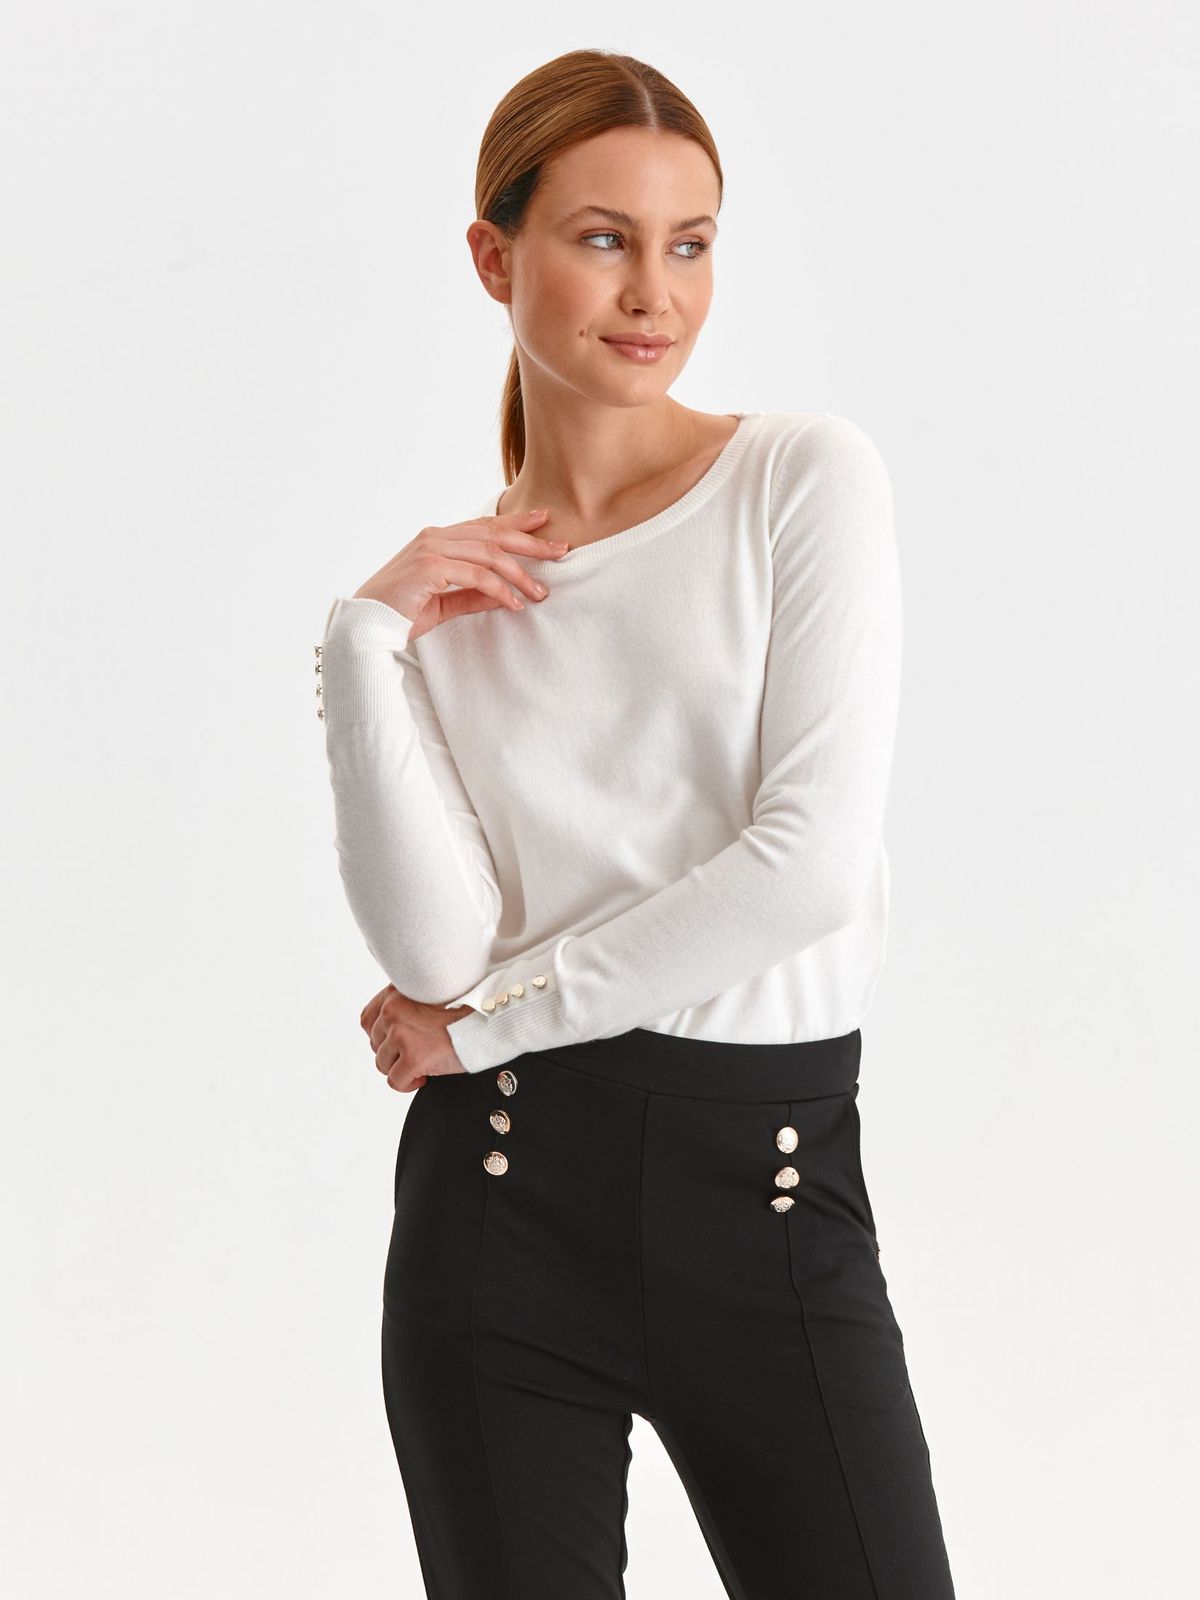 White sweater knitted thin fabric neckline